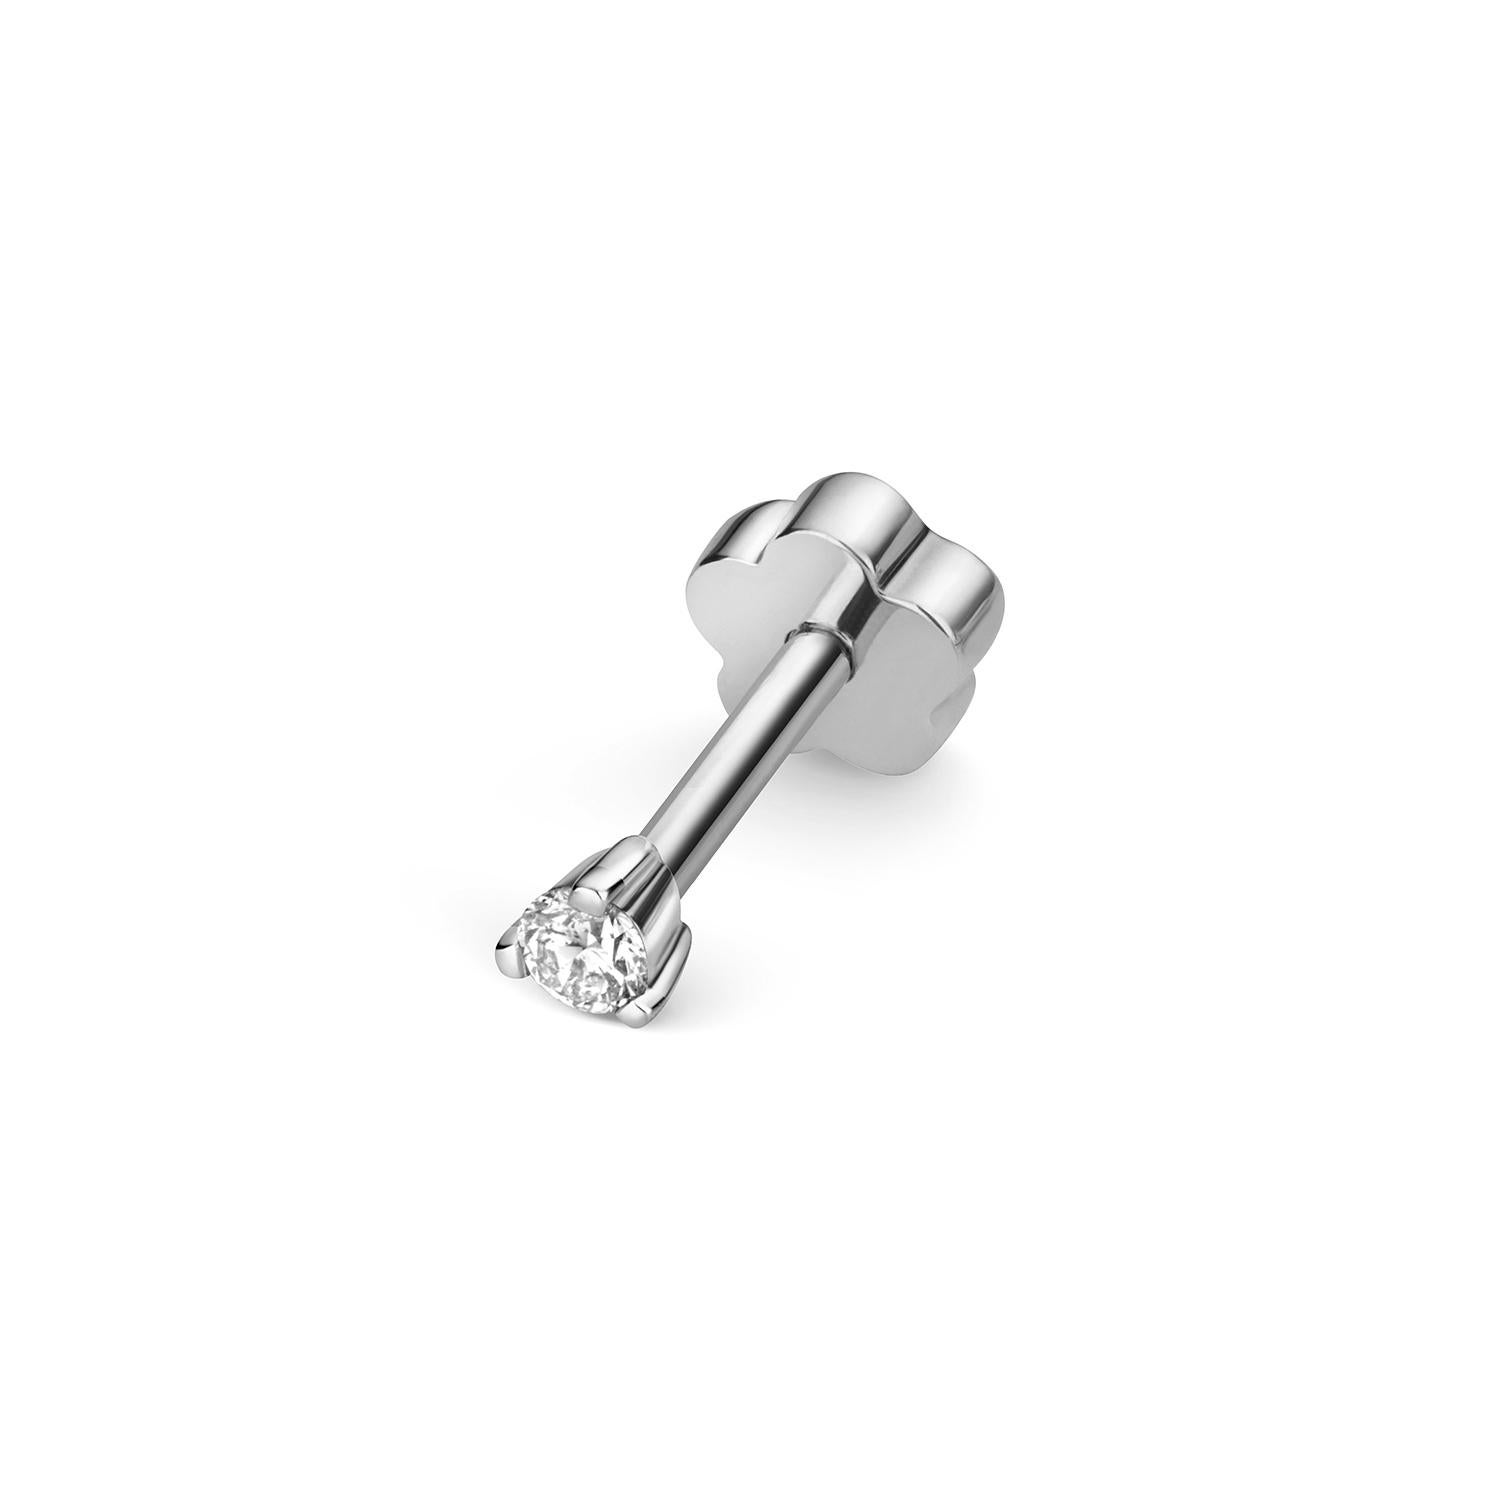 DIAMOND CARTILAGE 3CLAW STUD

18CT W/G H SI2 0.03CT

Weight: 0.6g